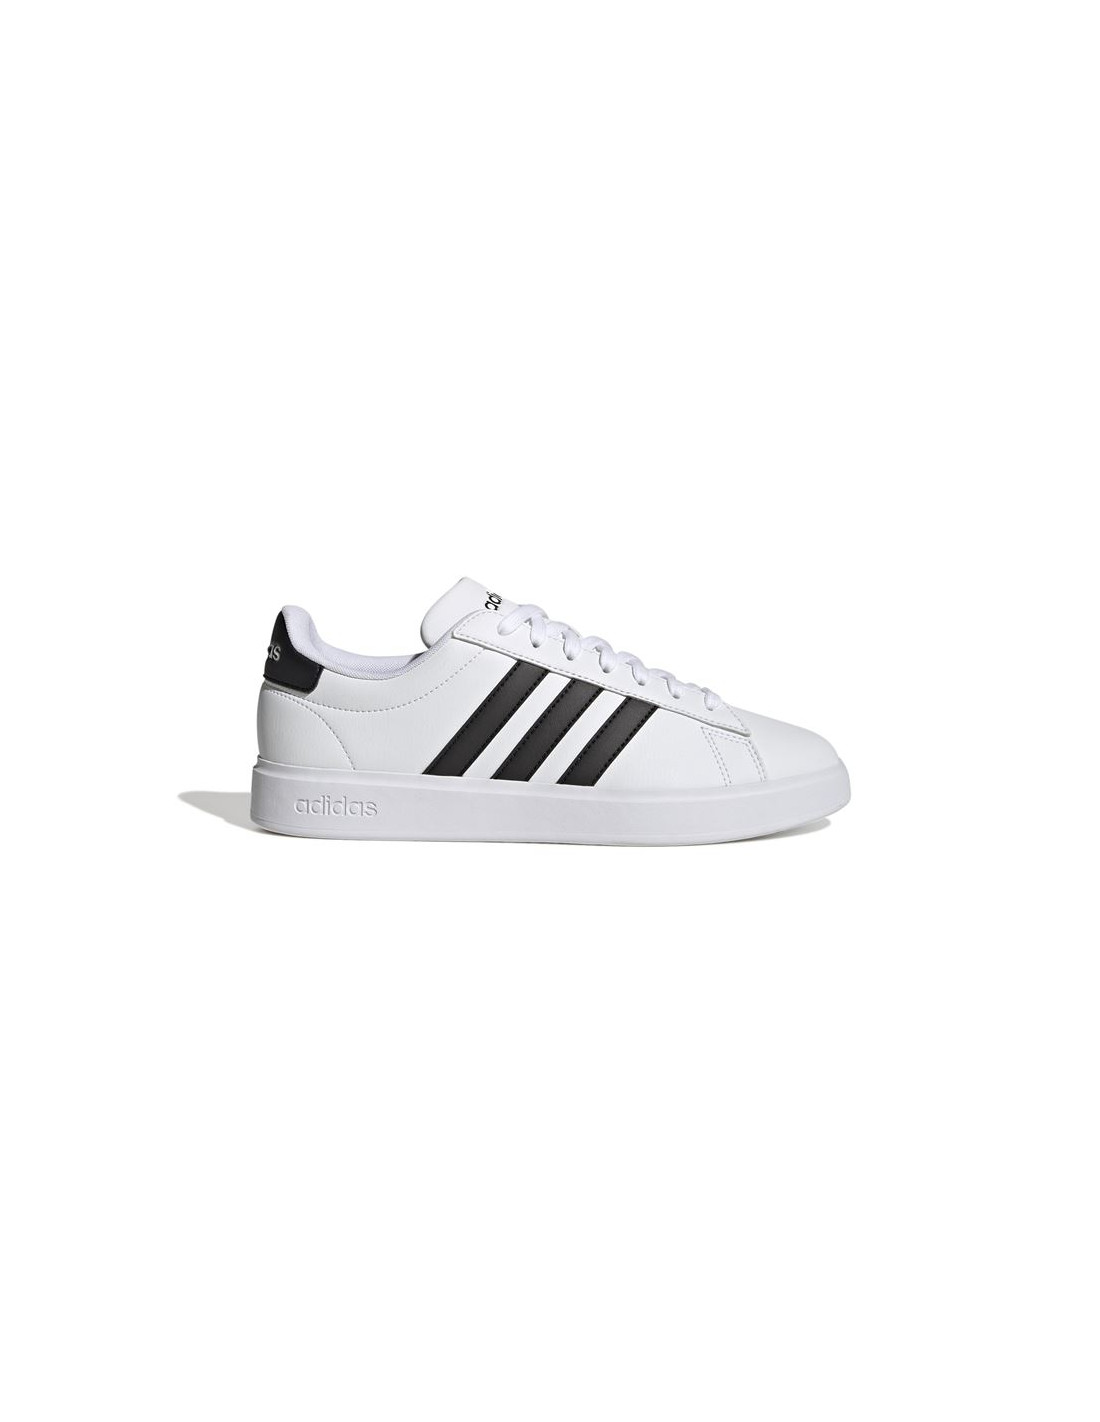 Zapatillas adidas grand lifestyle court comfort hombre wh